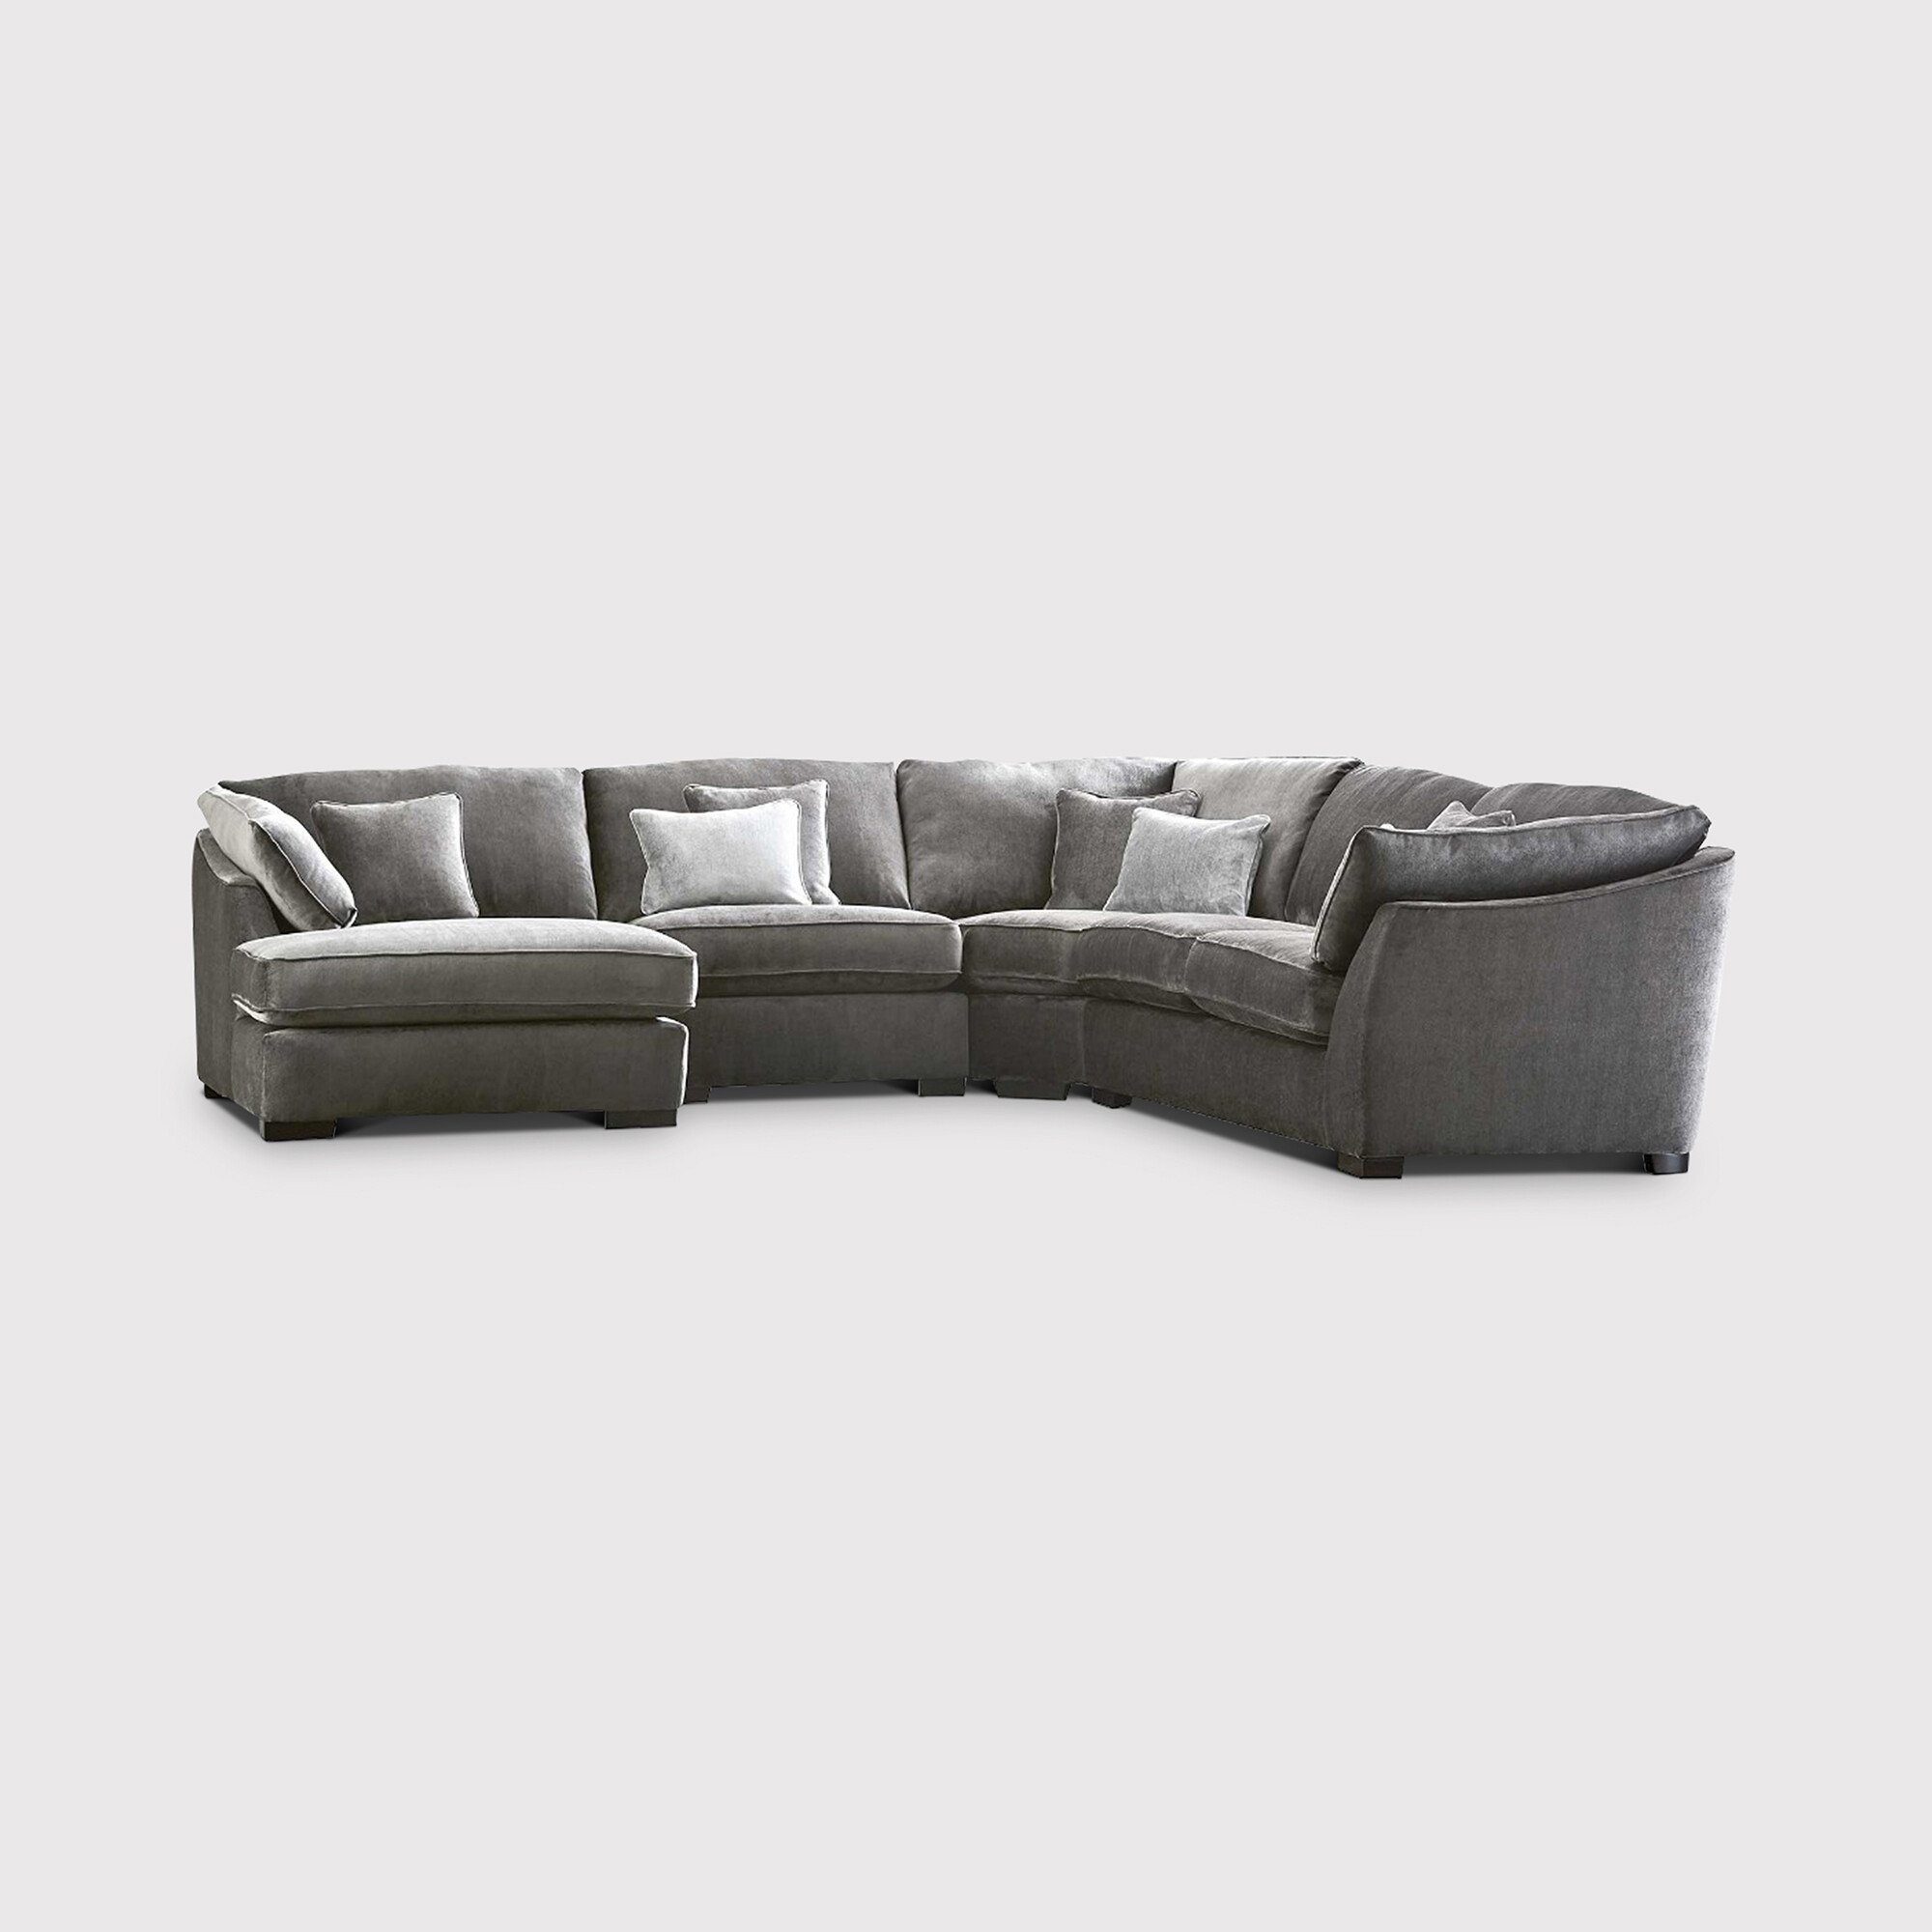 Borelly Corner Group Right With Chaise, Grey Fabric | Barker & Stonehouse